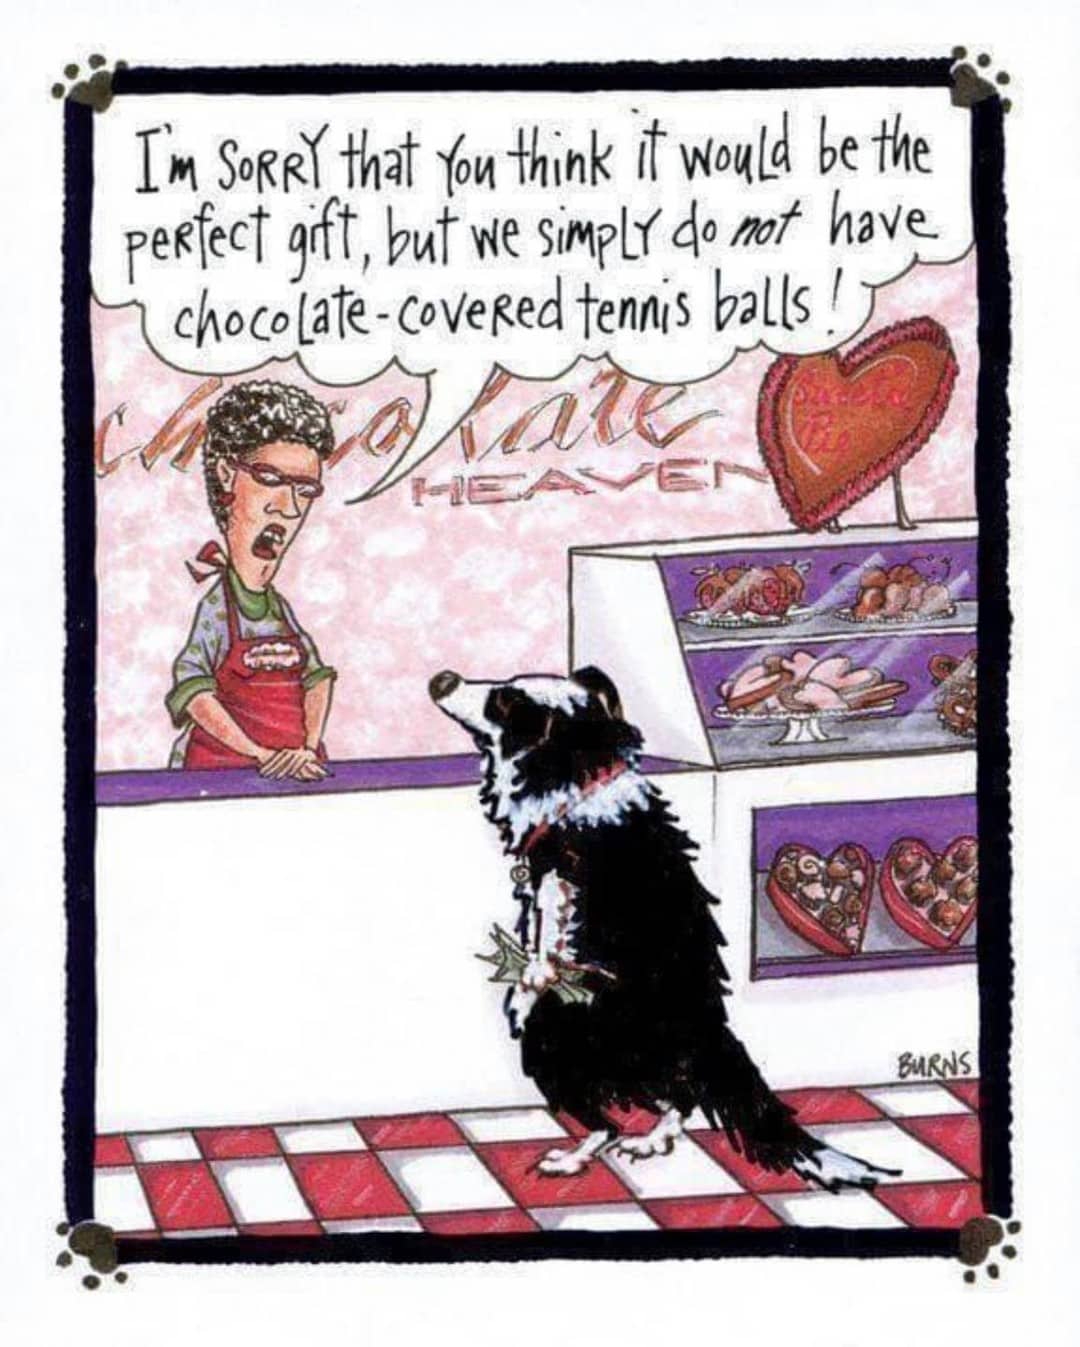 Happy Valentines Day everyone!
Don’t forget to show your beautiful pets some extra love today